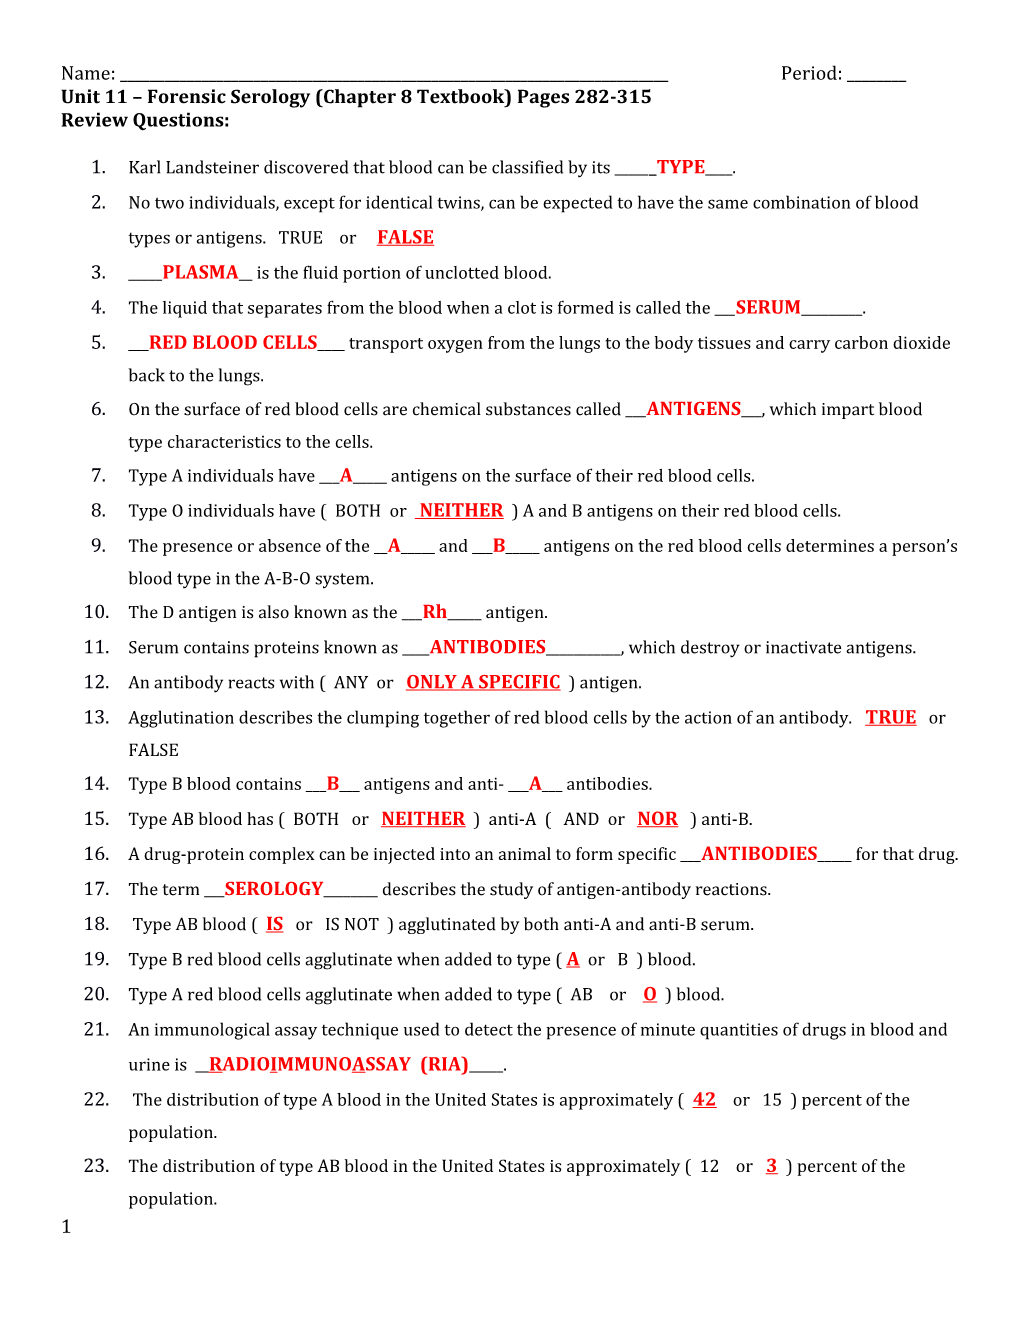 Unit 11 Forensic Serology (Chapter 8 Textbook) Pages 282-315